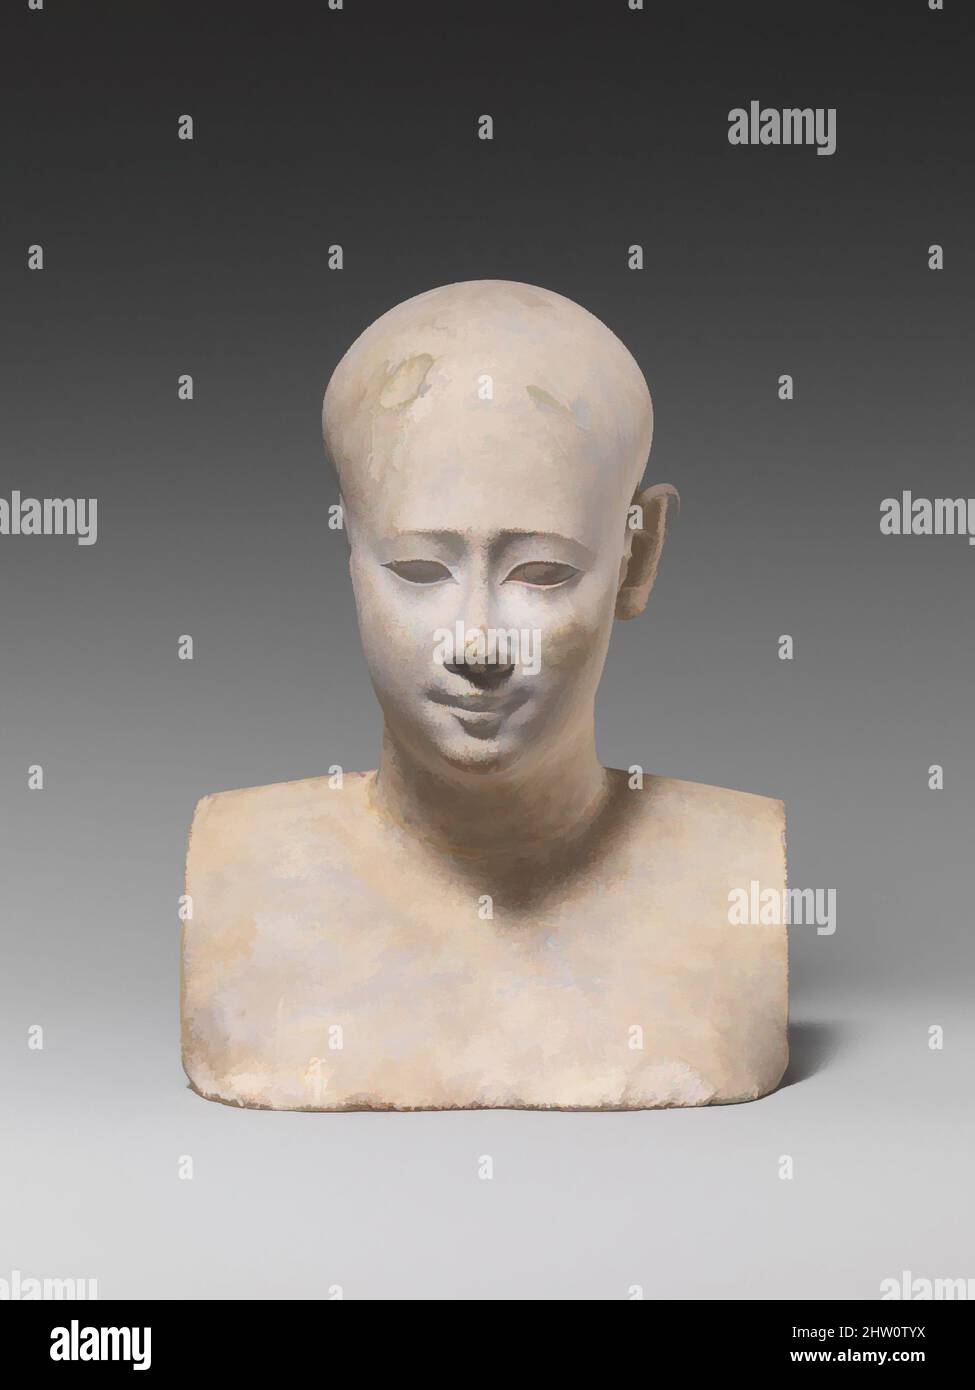 Art inspired by Bust of a priestly figure, Late Period–Ptolemaic Period, 400–200 B.C., From Egypt, Limestone, H. 19 cm (7 1/2 in); W. 14.6 cm (5 3/4 in.); D. 12 cm (4 3/4 in.), Small Late Period and Ptolemaic reliefs or sculptures that depict a subject in a partial or unfinished way, Classic works modernized by Artotop with a splash of modernity. Shapes, color and value, eye-catching visual impact on art. Emotions through freedom of artworks in a contemporary way. A timeless message pursuing a wildly creative new direction. Artists turning to the digital medium and creating the Artotop NFT Stock Photo